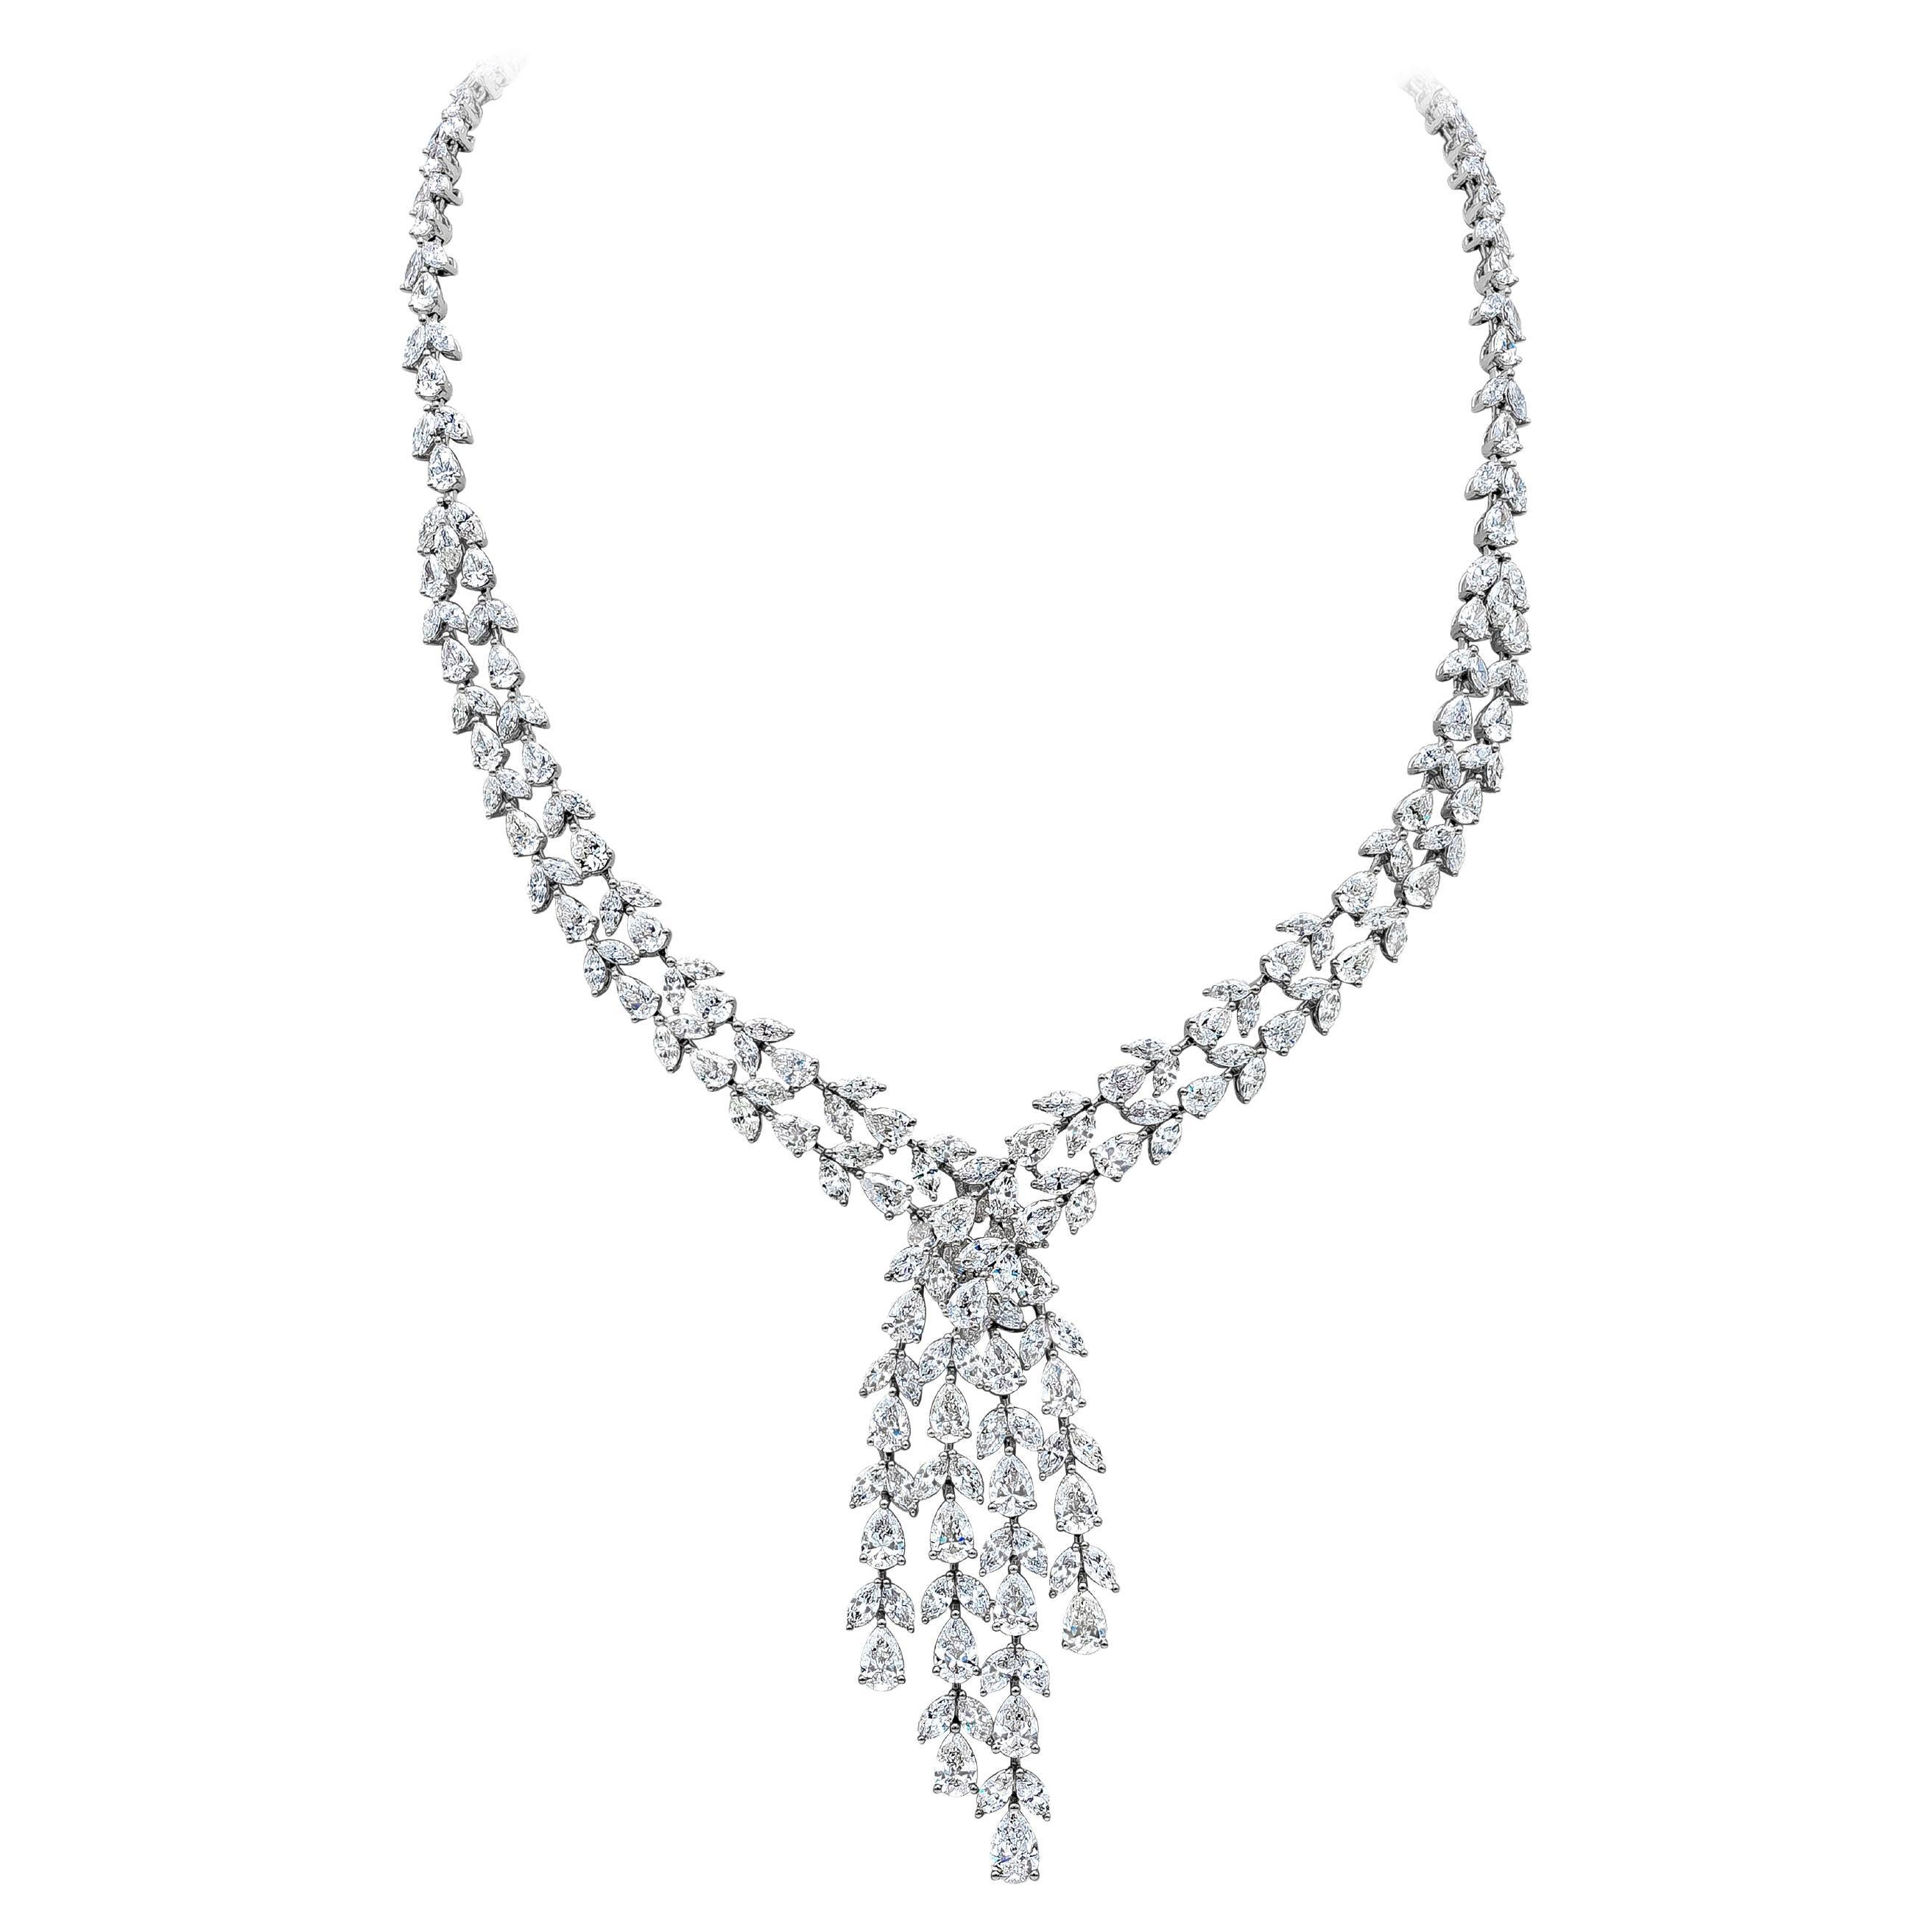 Roman Malakov 41.21 Carat Total Mixed Cut Cluster Diamond Necklace in White Gold